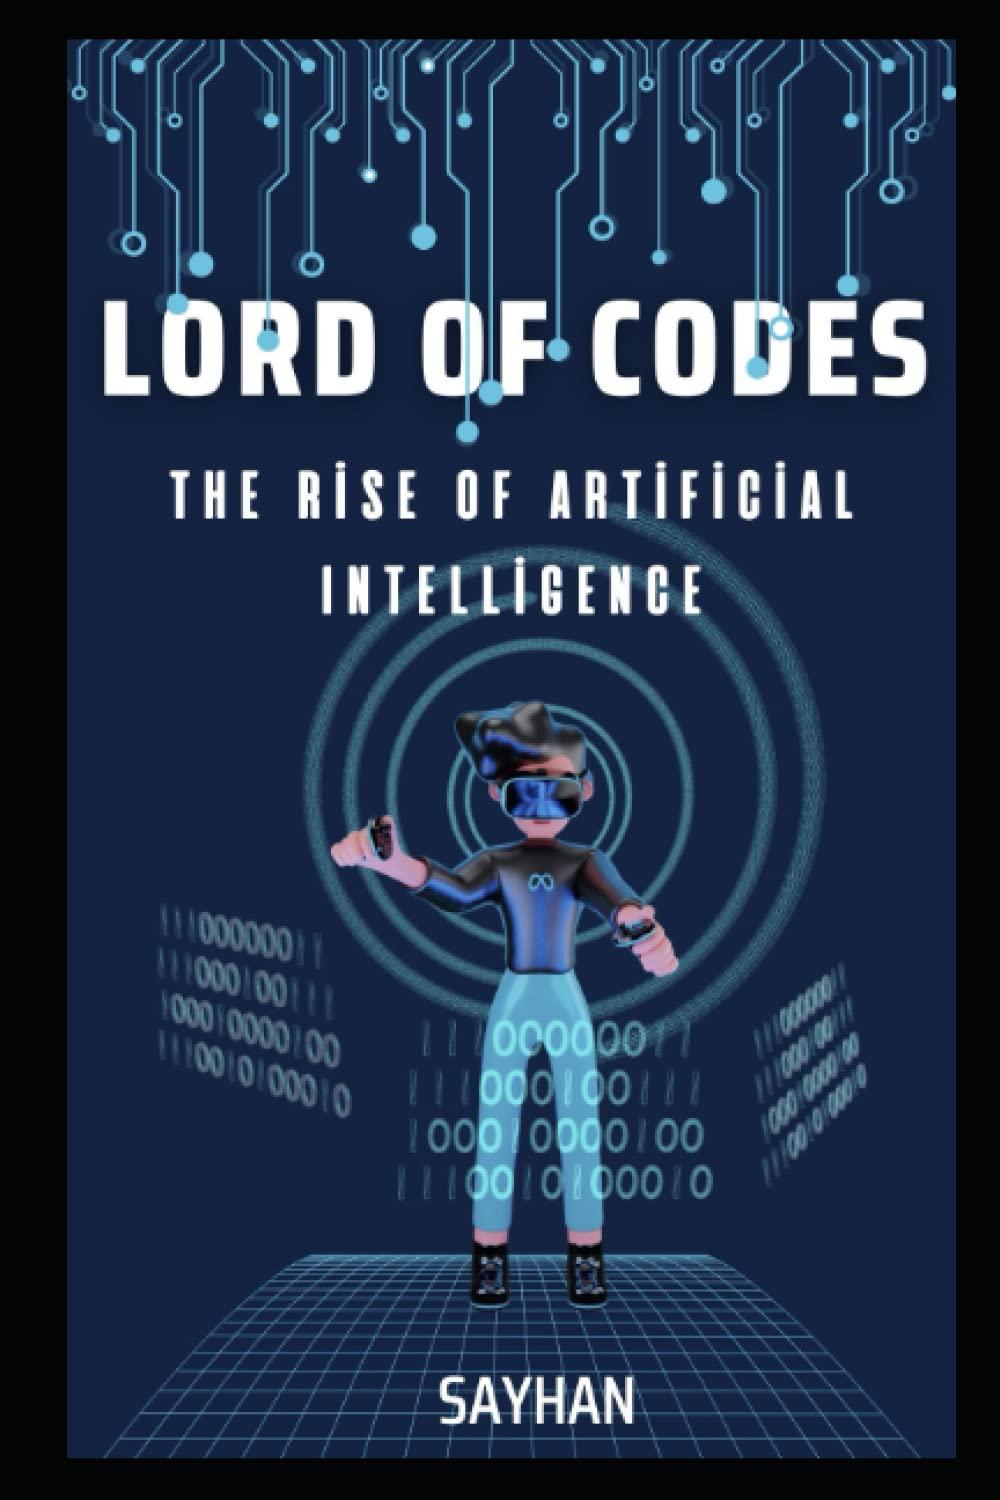 lord of codes  the rise of artificial İntelligence 1st edition sayhan gökşin b0c6bwmj1g, 979-8396173002